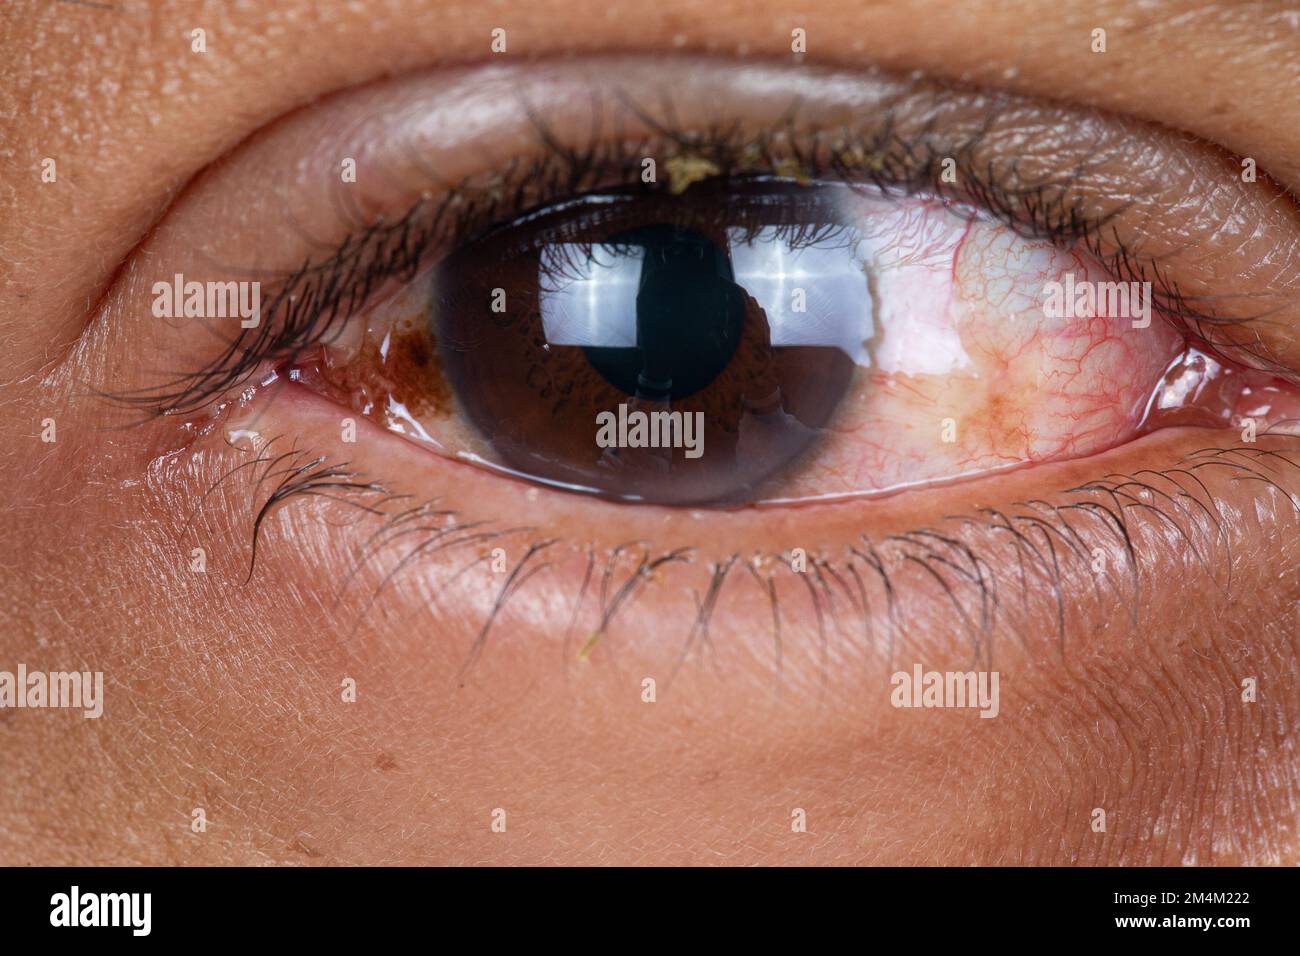 Rovigo, ITALY - October 16, 2020: Red eye of african man with conjunctivitis due to pollen allergy, details of redness of the capillaries and dry puru Stock Photo